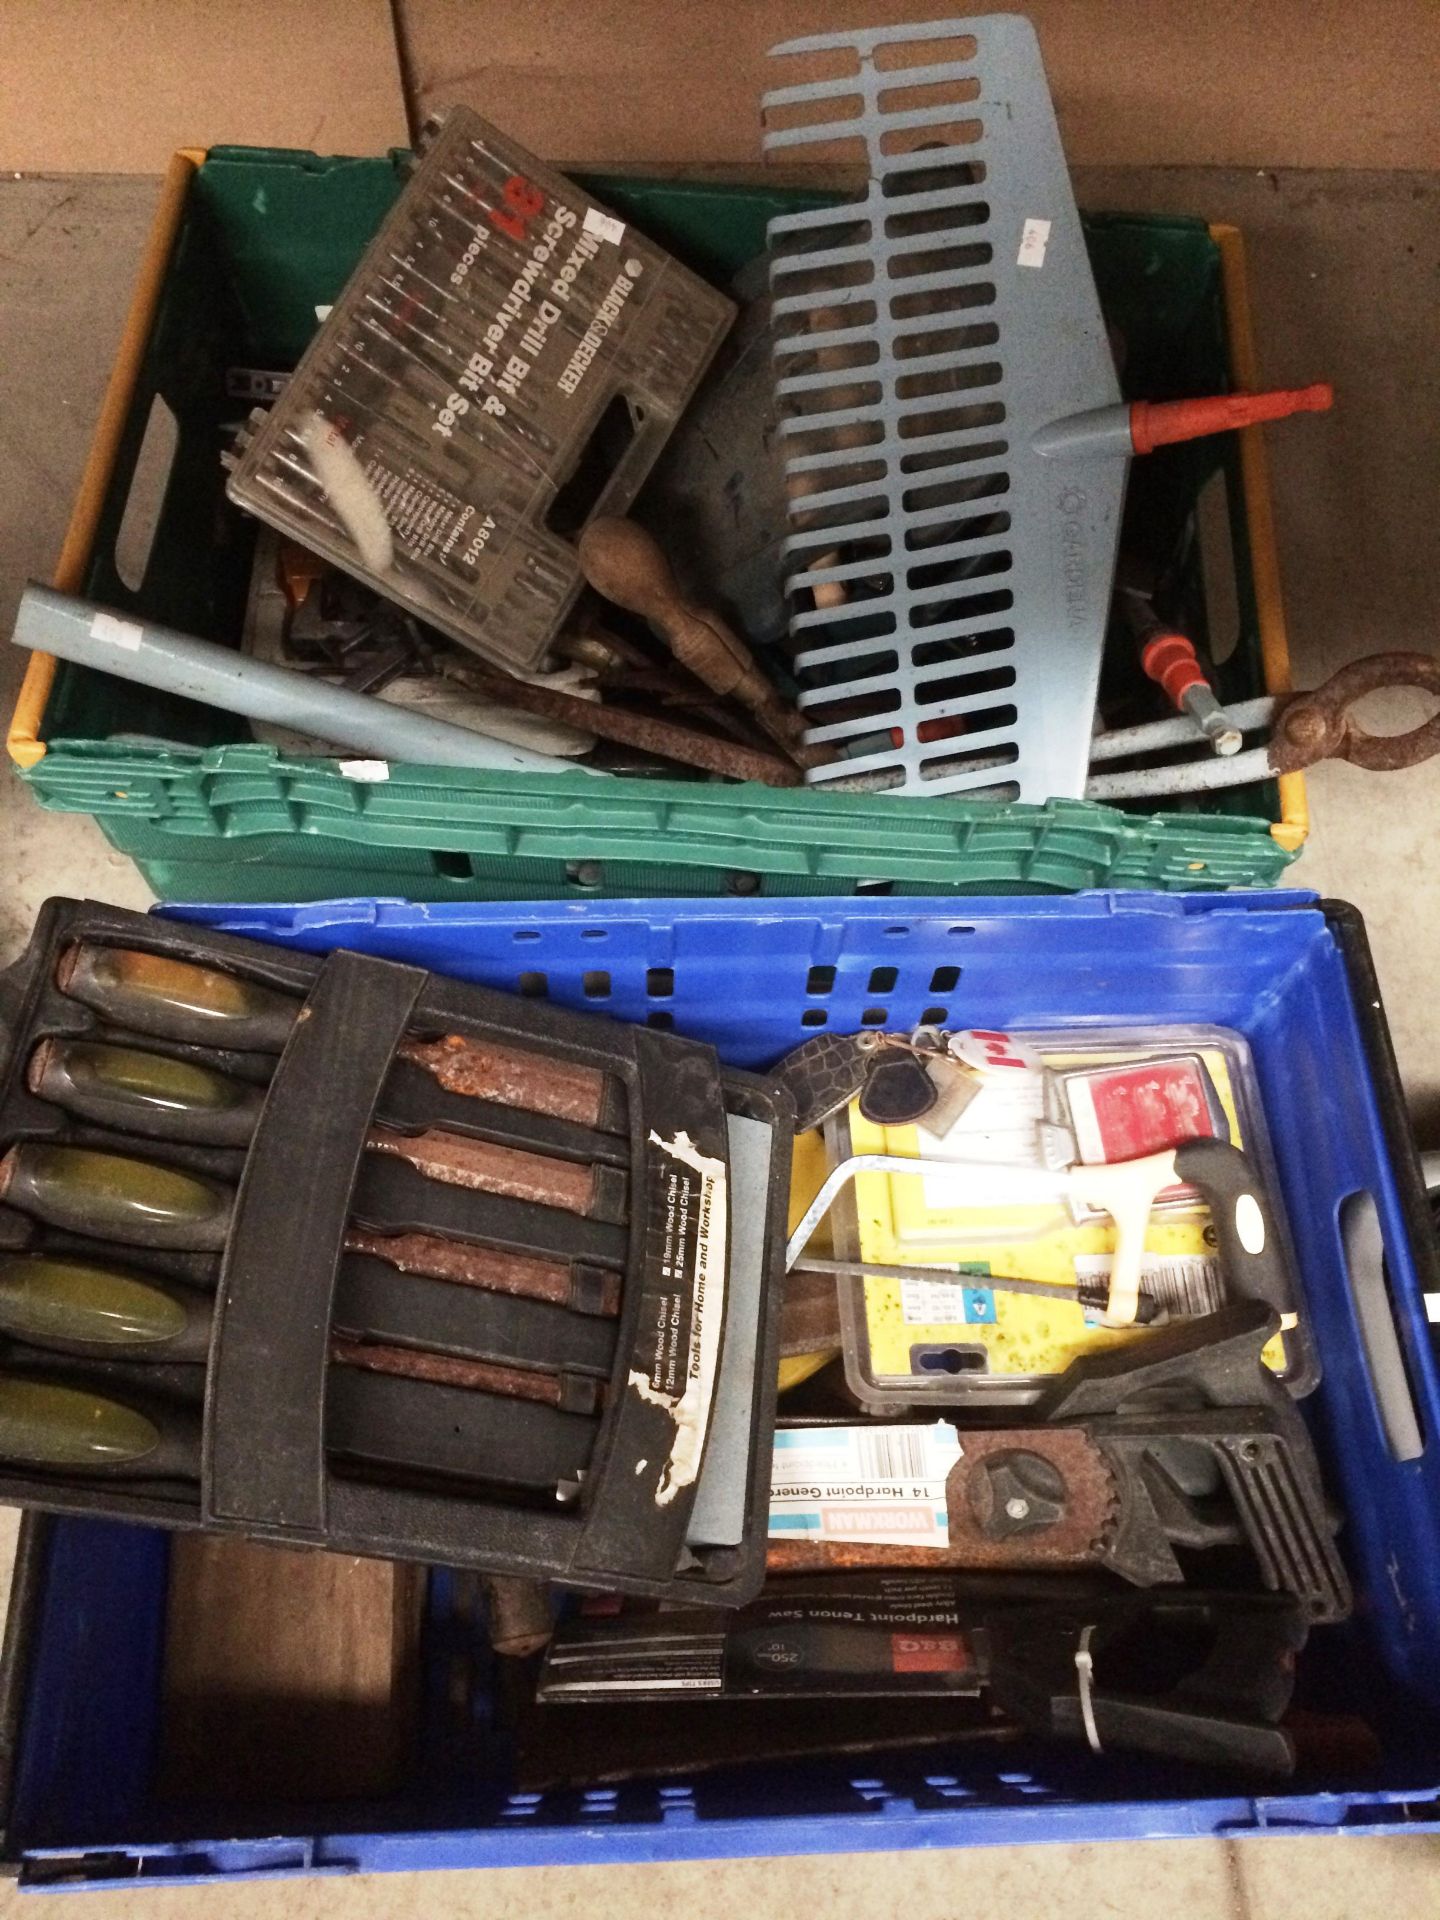 Contents to crates assorted hand tools, shoe last etc.